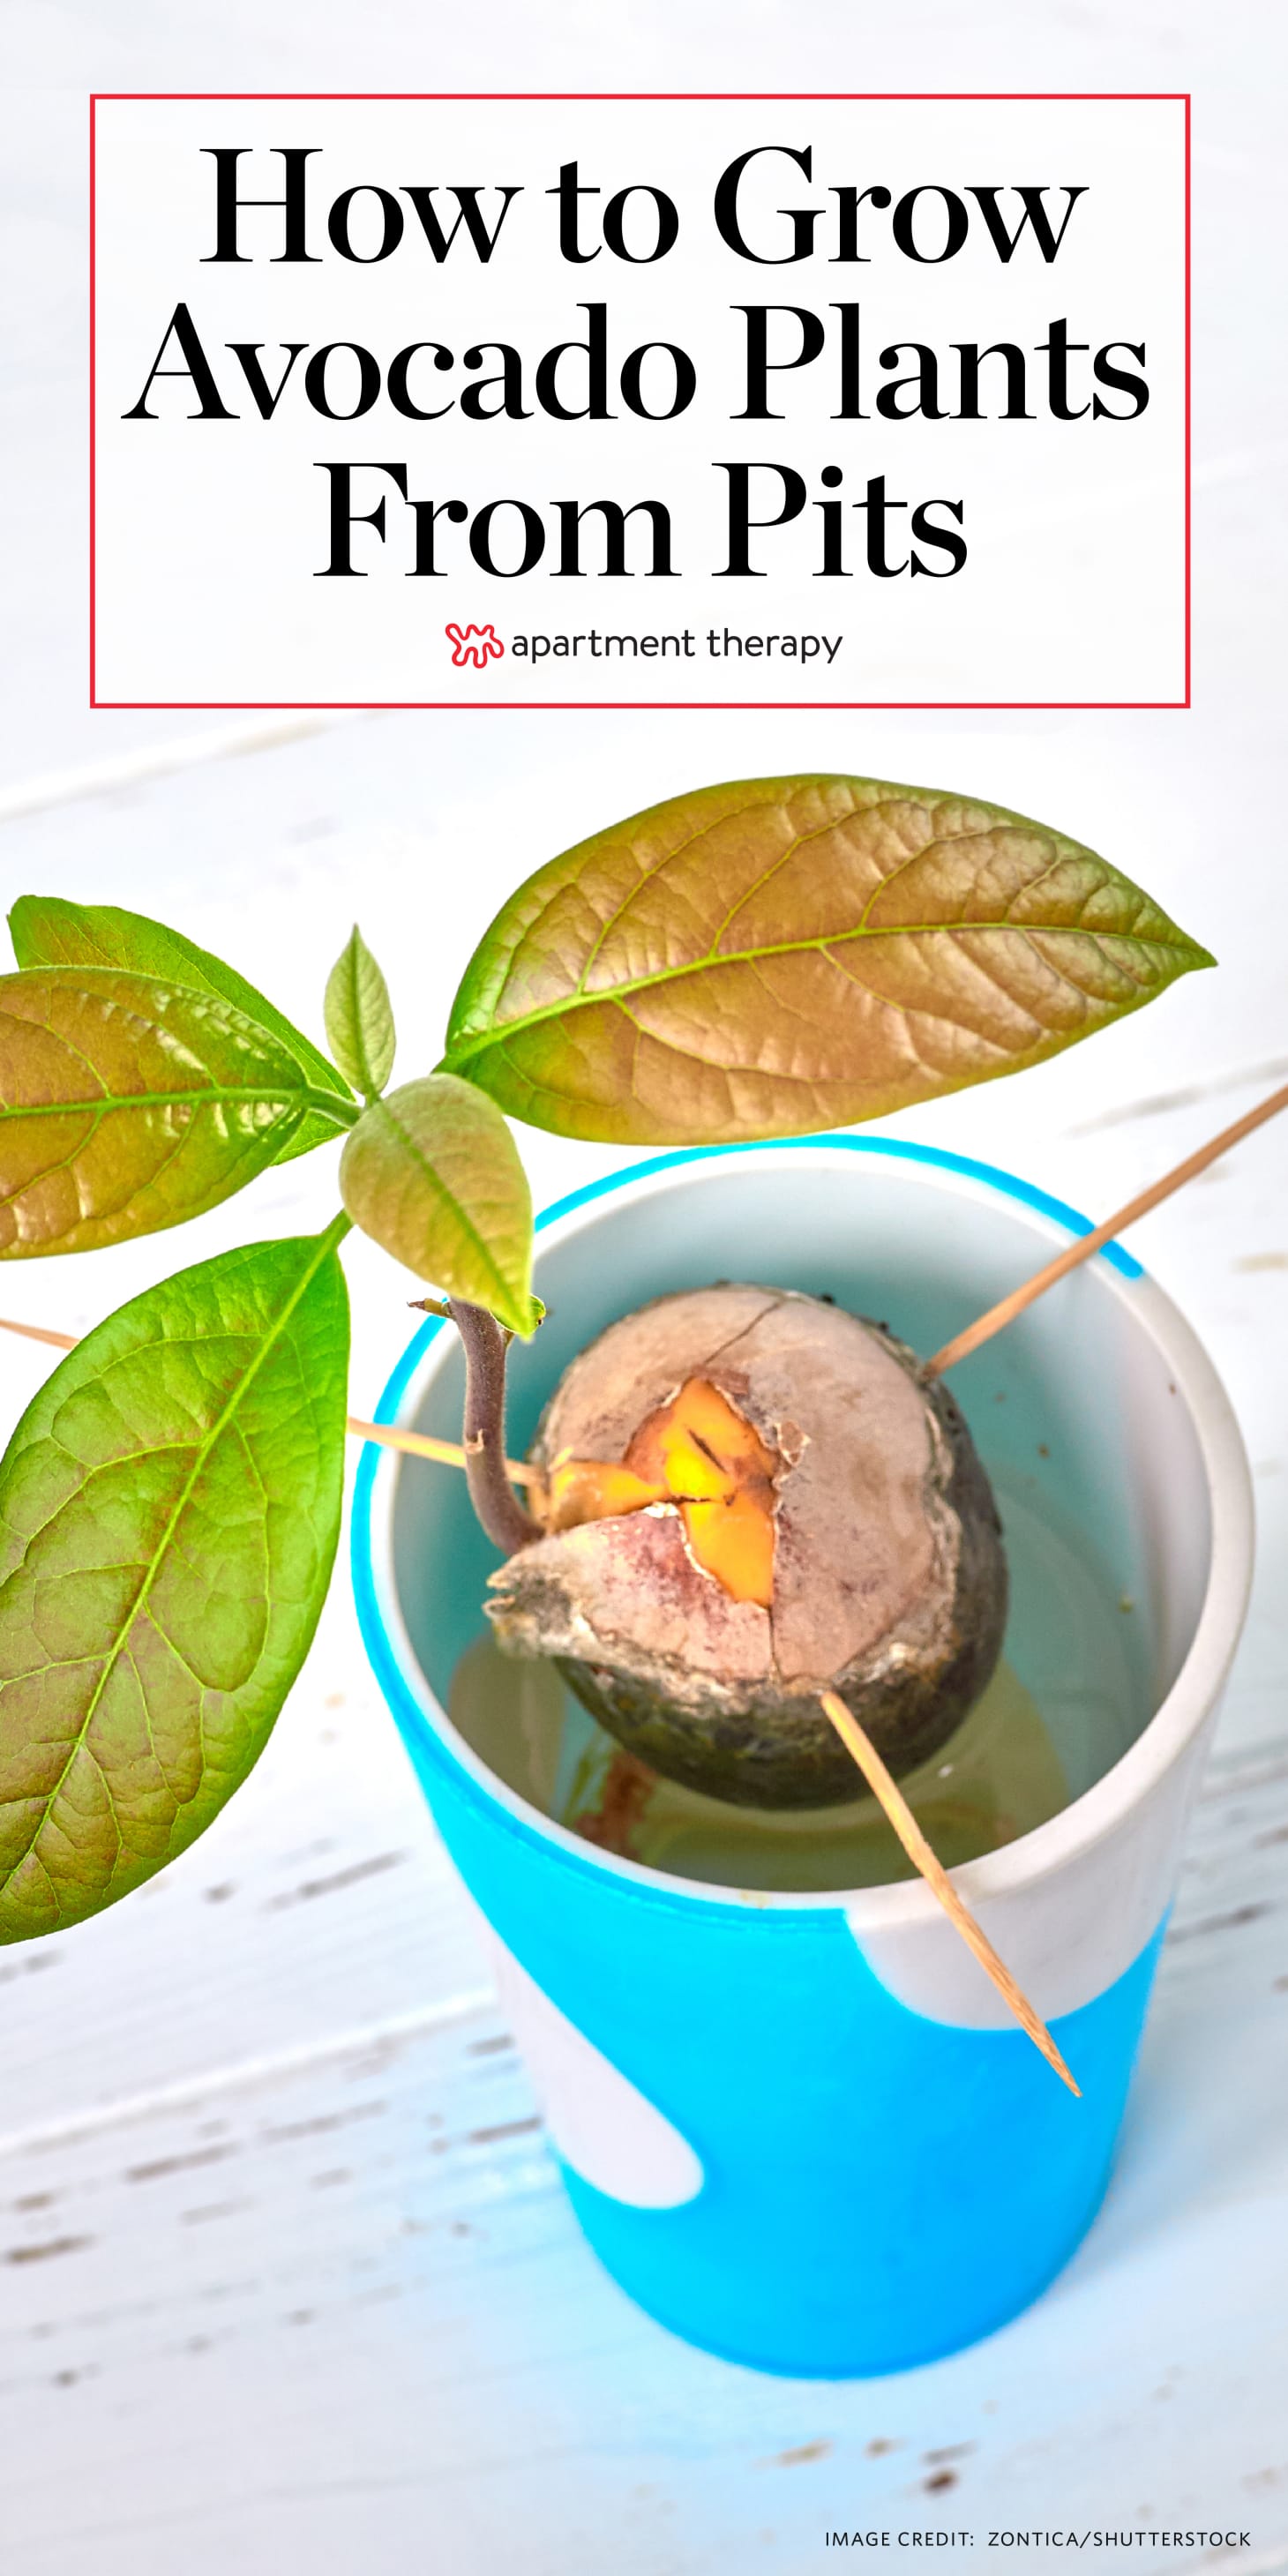 How to Grow Avocado Plants From Pits Apartment Therapy